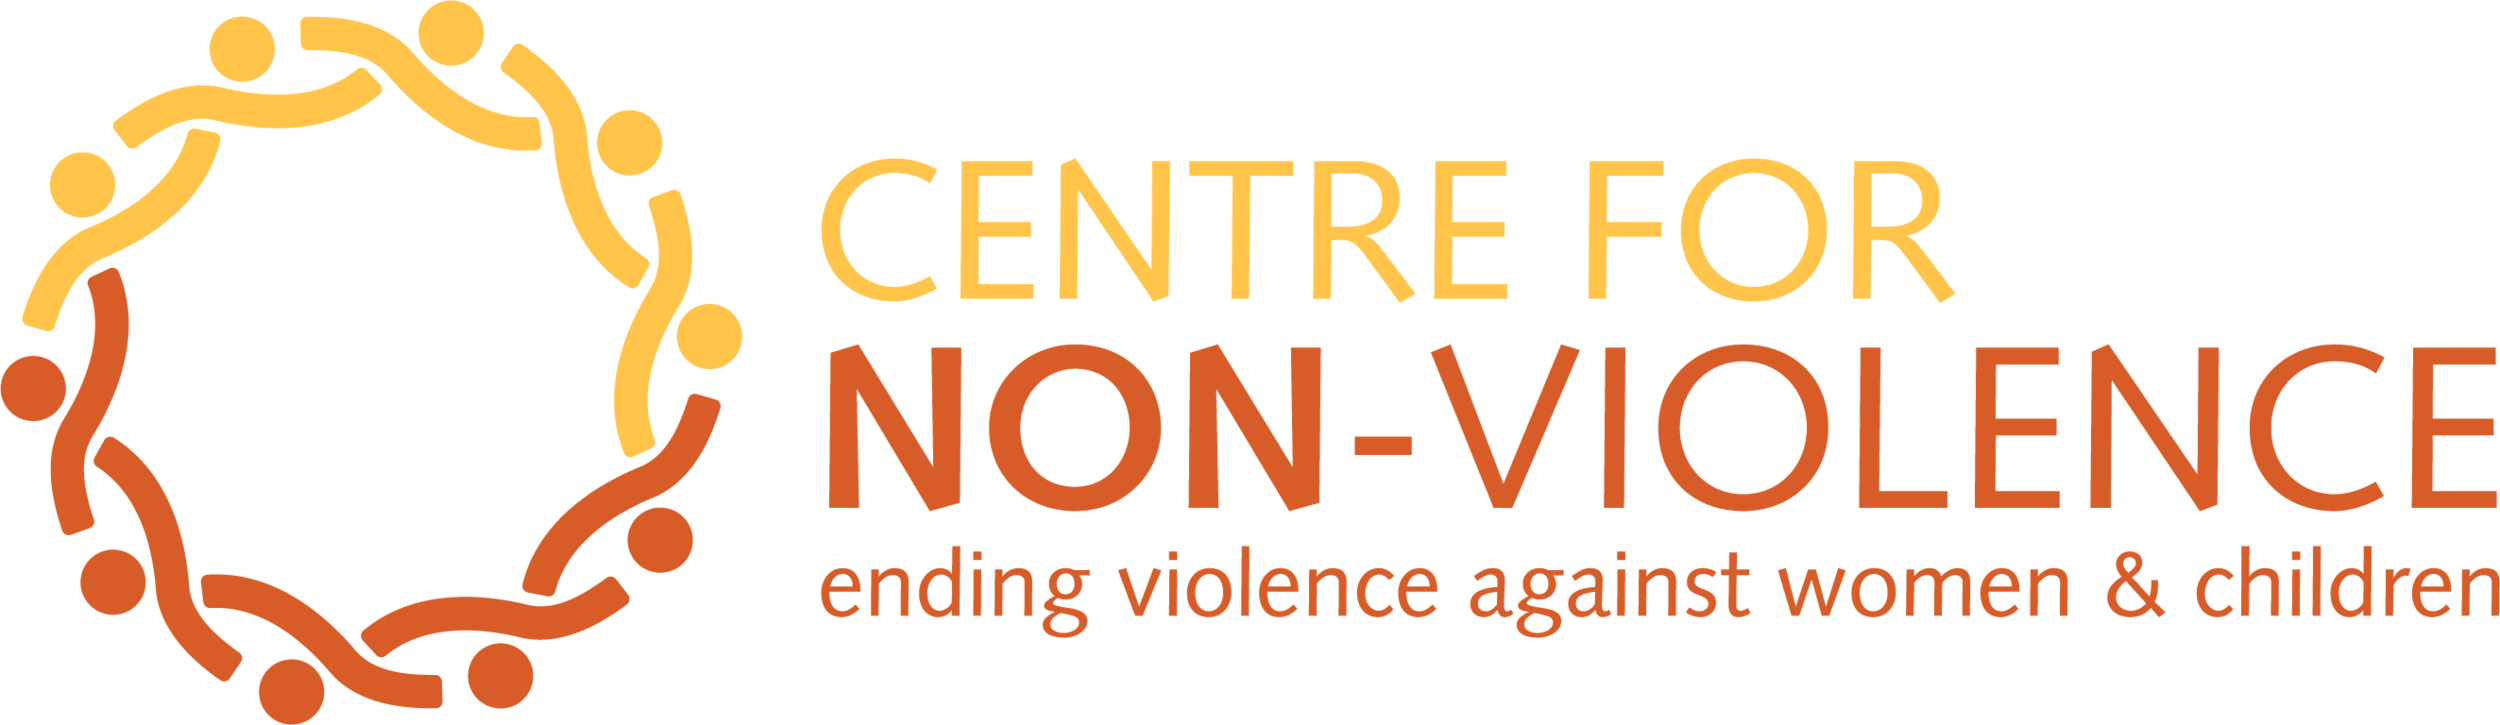 Centre for Non-violence Logo_RGB.png